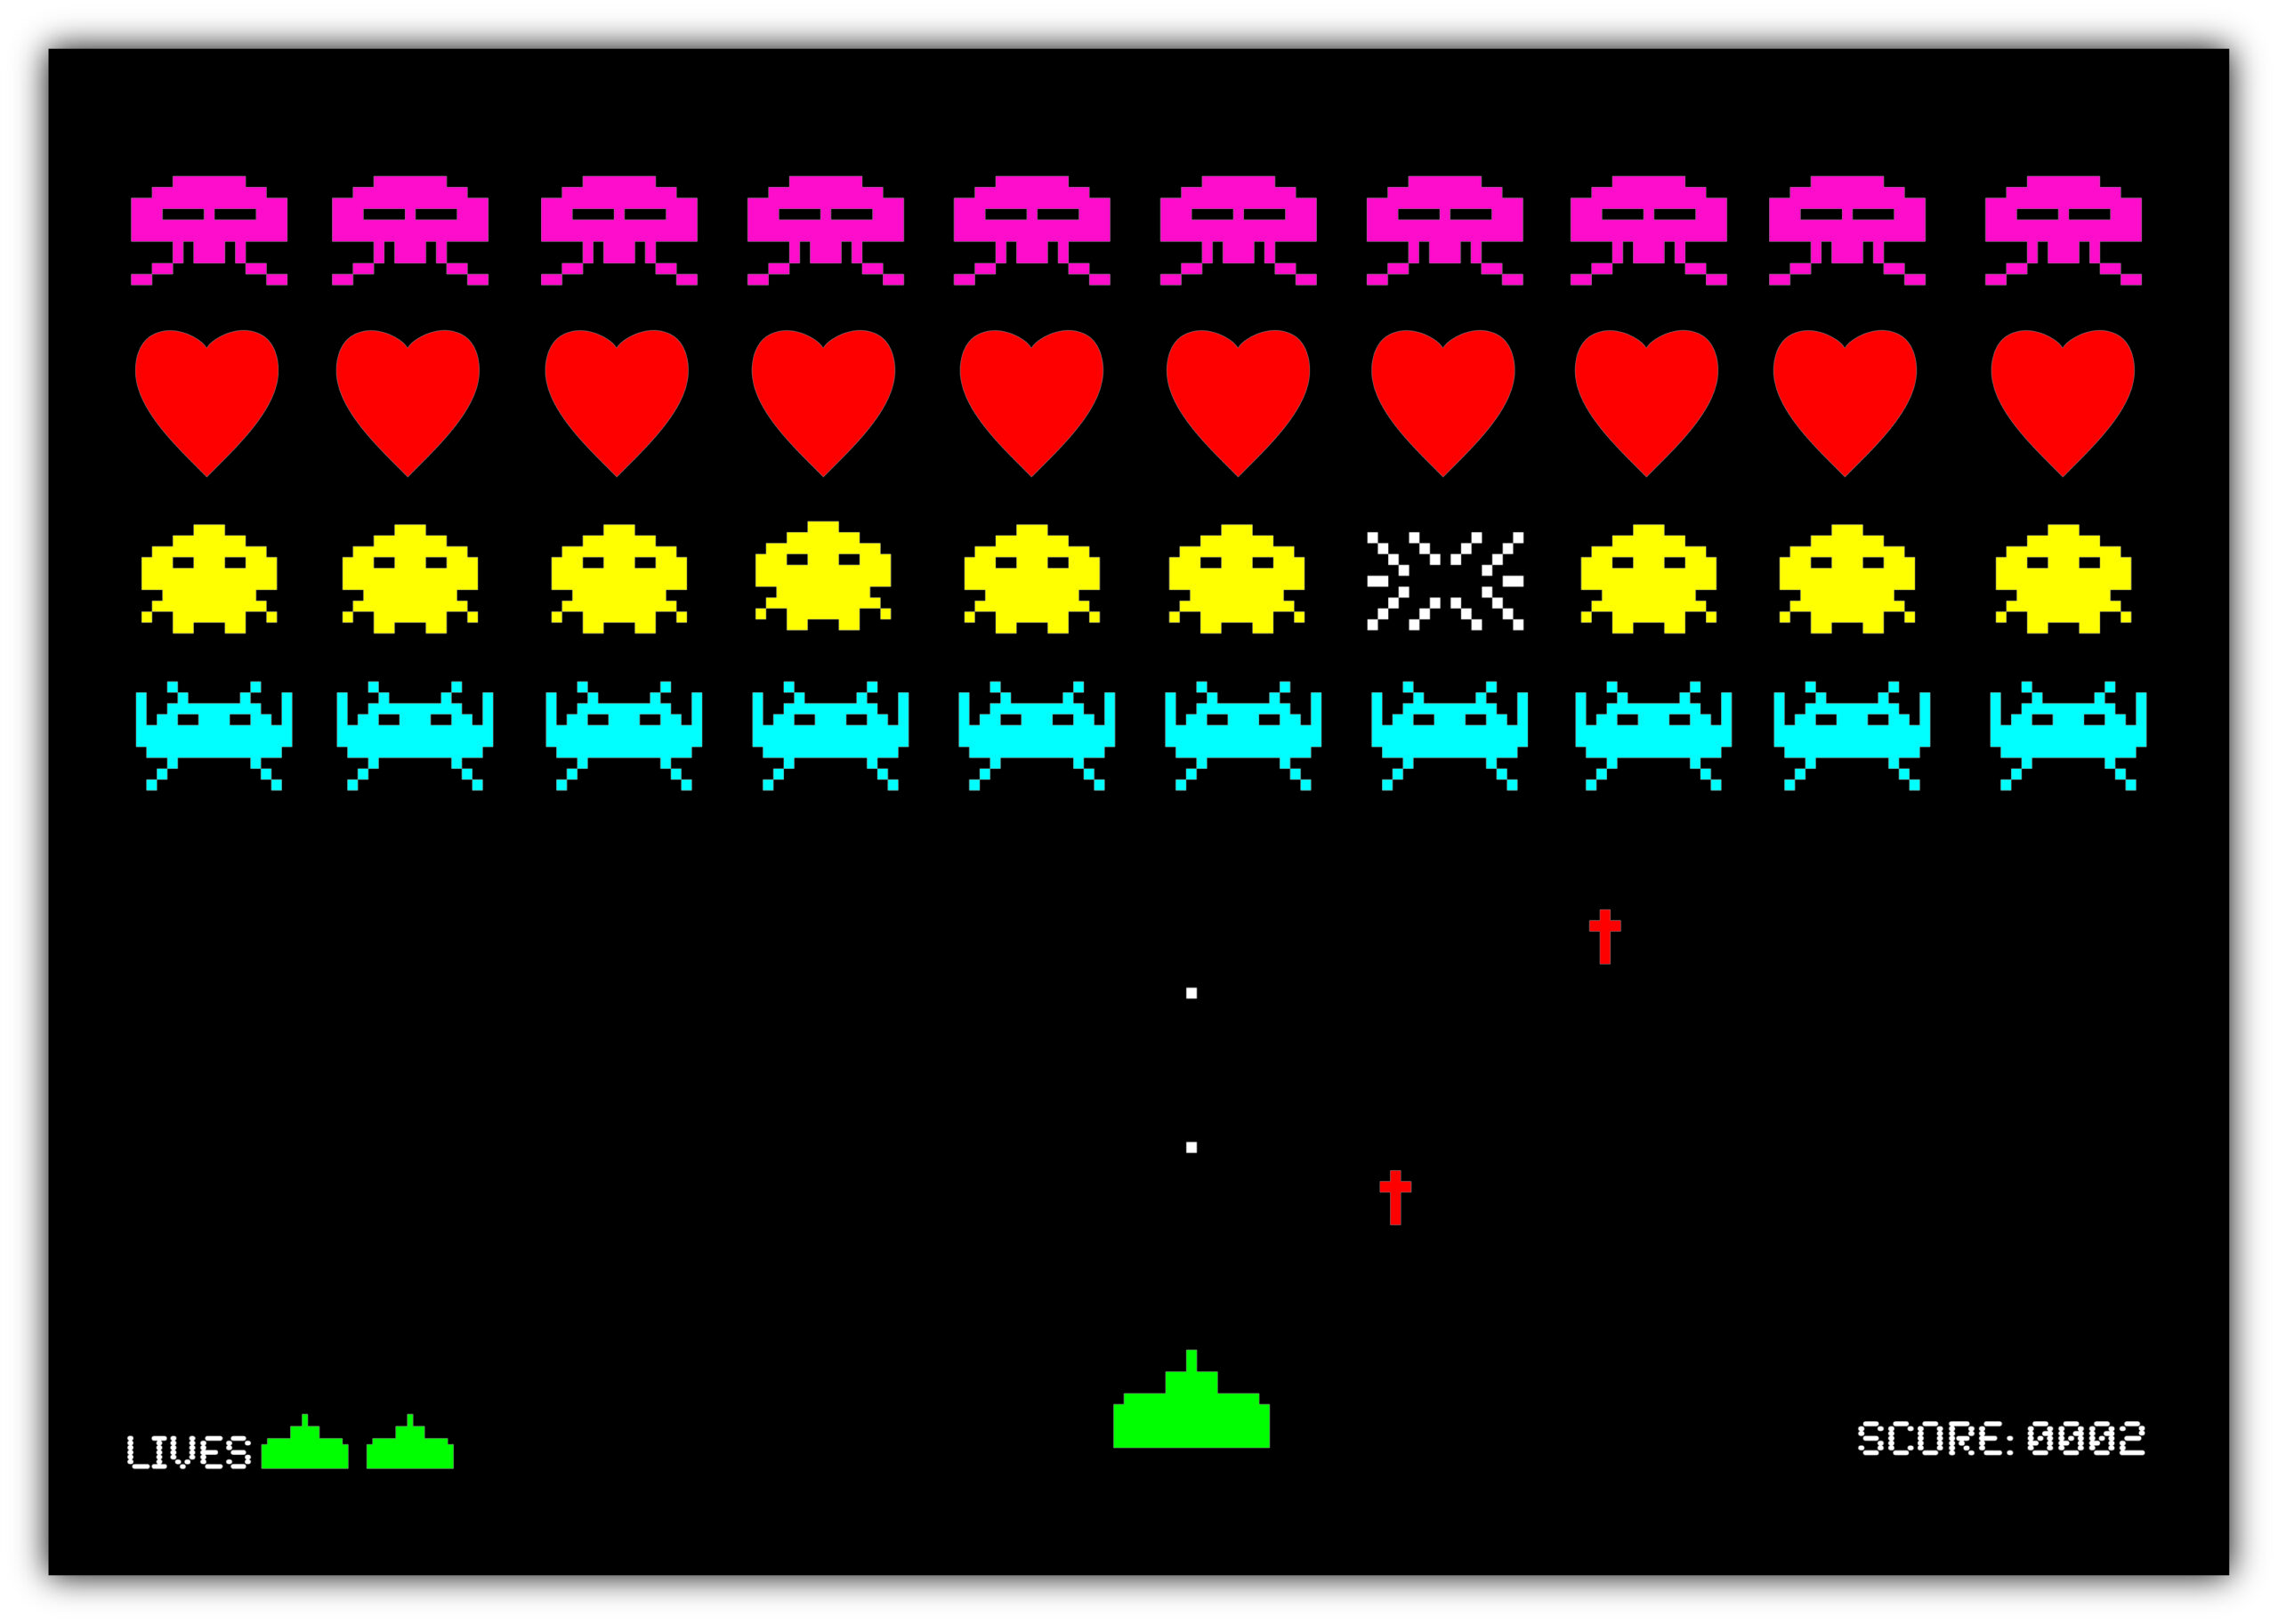 heart invaders